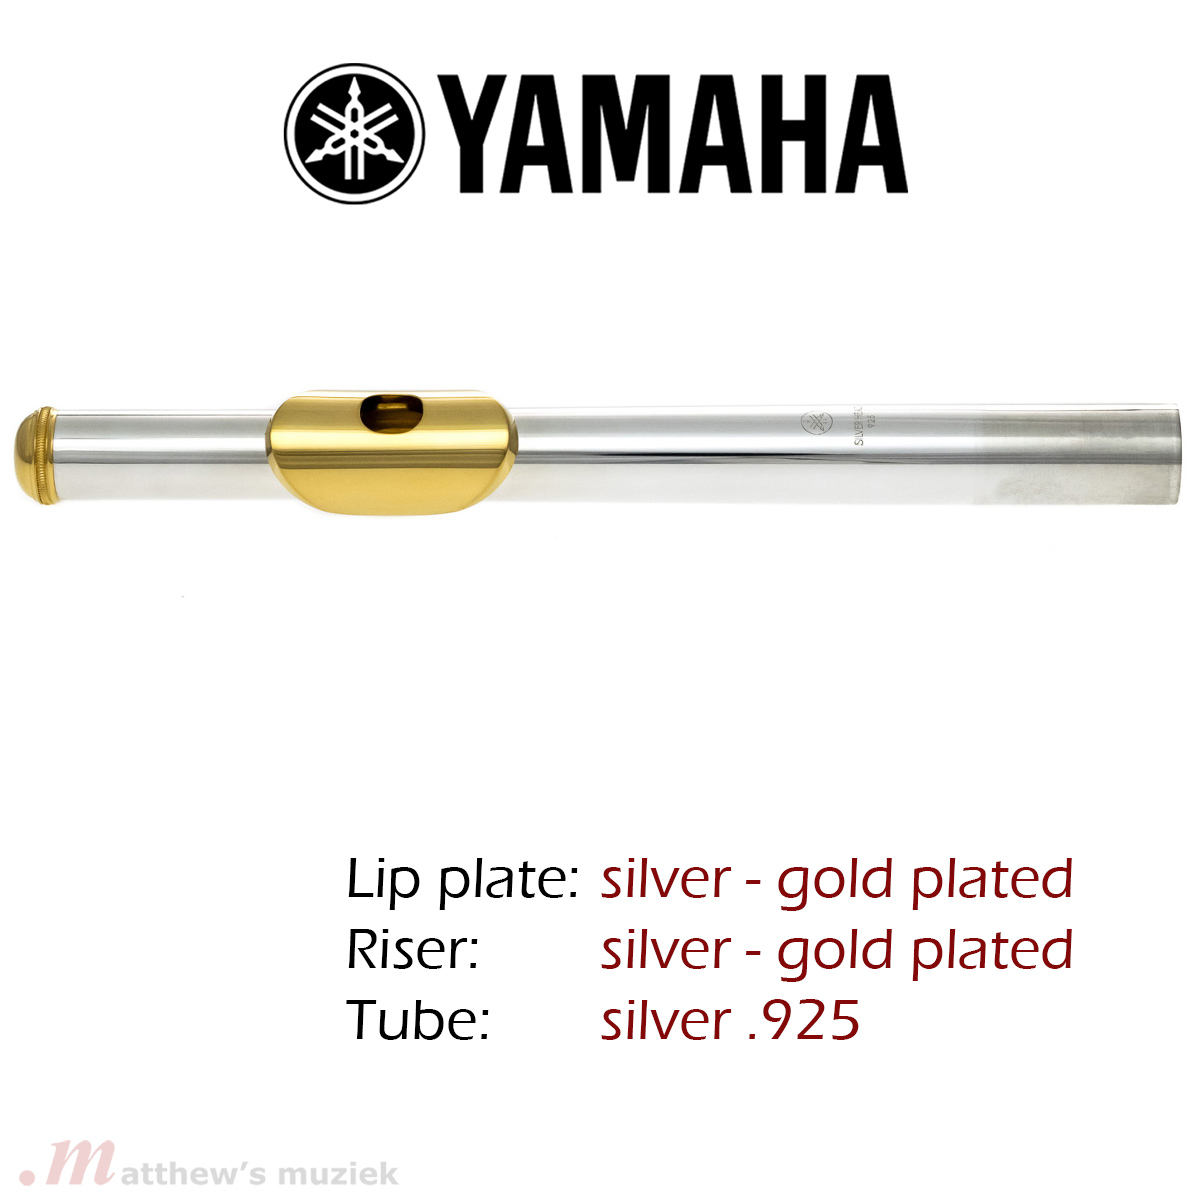 Yamaha Head Joint - Sterling Silver - Gold Plated Lipplate/Riser